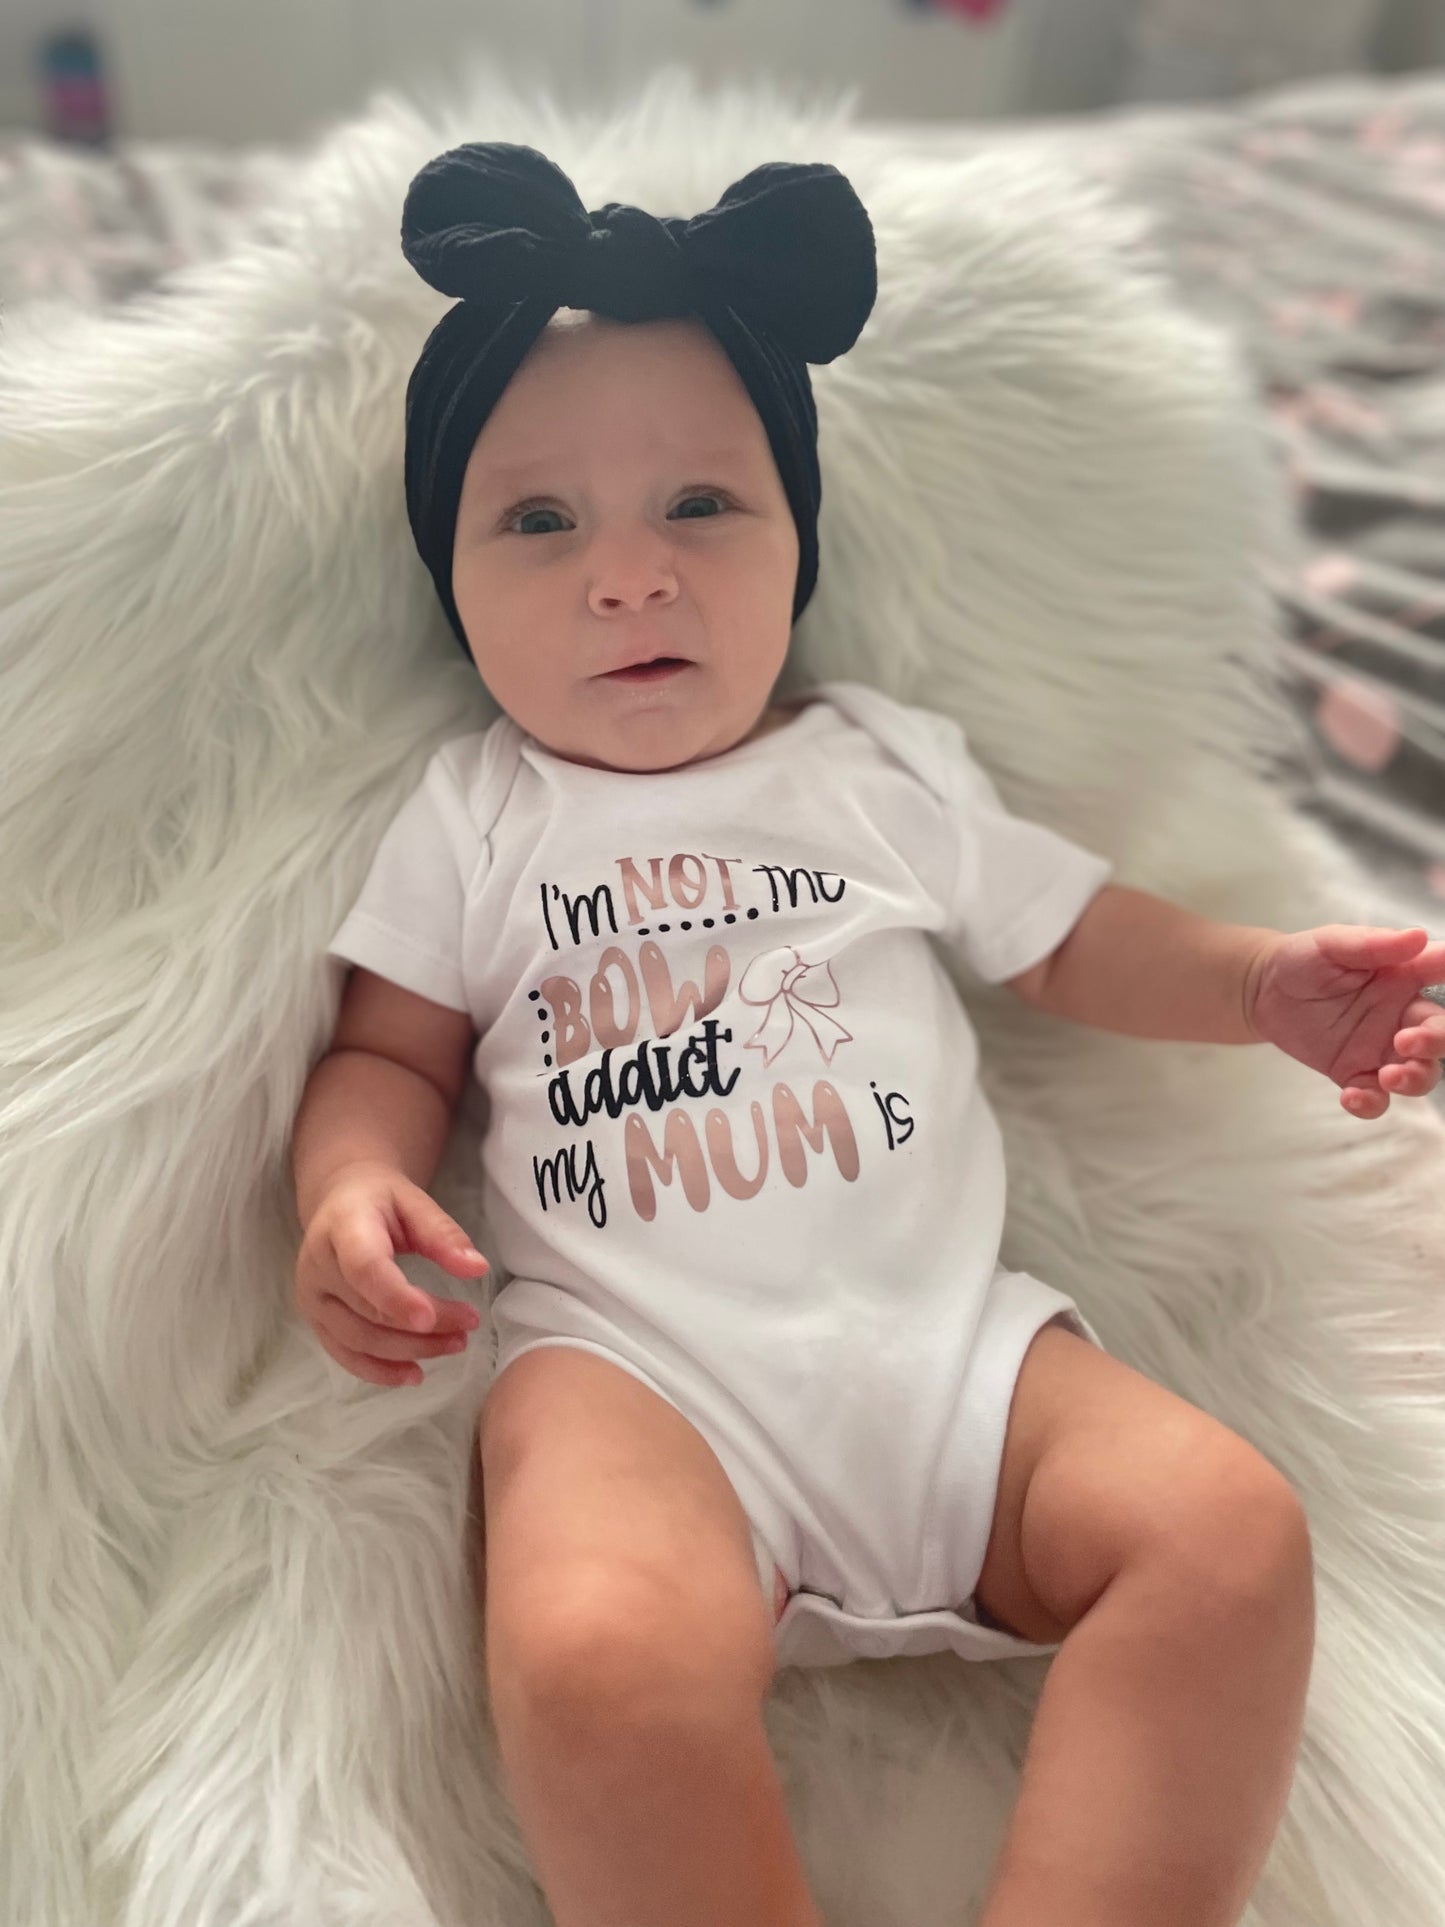 Baby Bodysuit Vest - I’m not the bow addict, my mum is - can be personalised